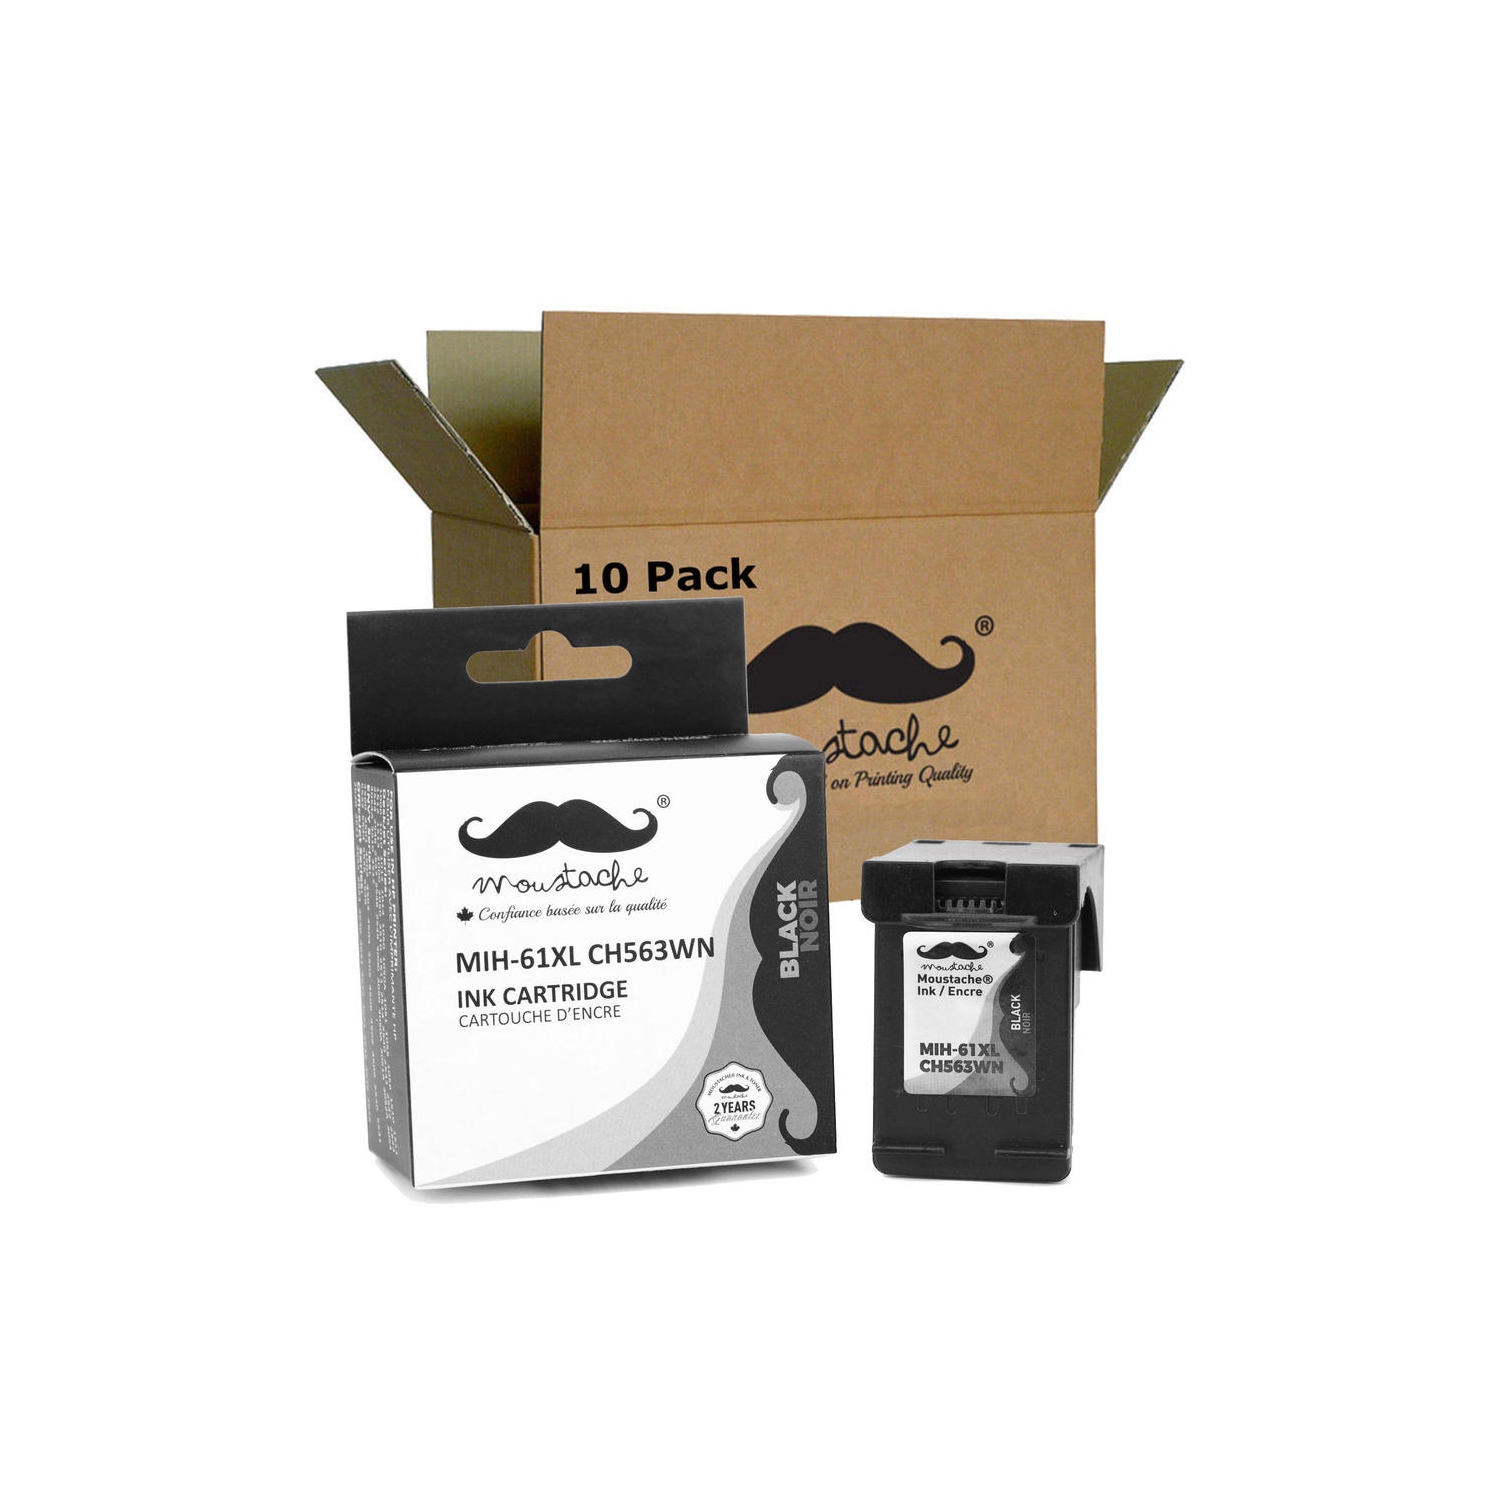 Remanufactured HP 61XL CH563WN Black Ink Cartridge High Yield - Moustache® - 10/Pack